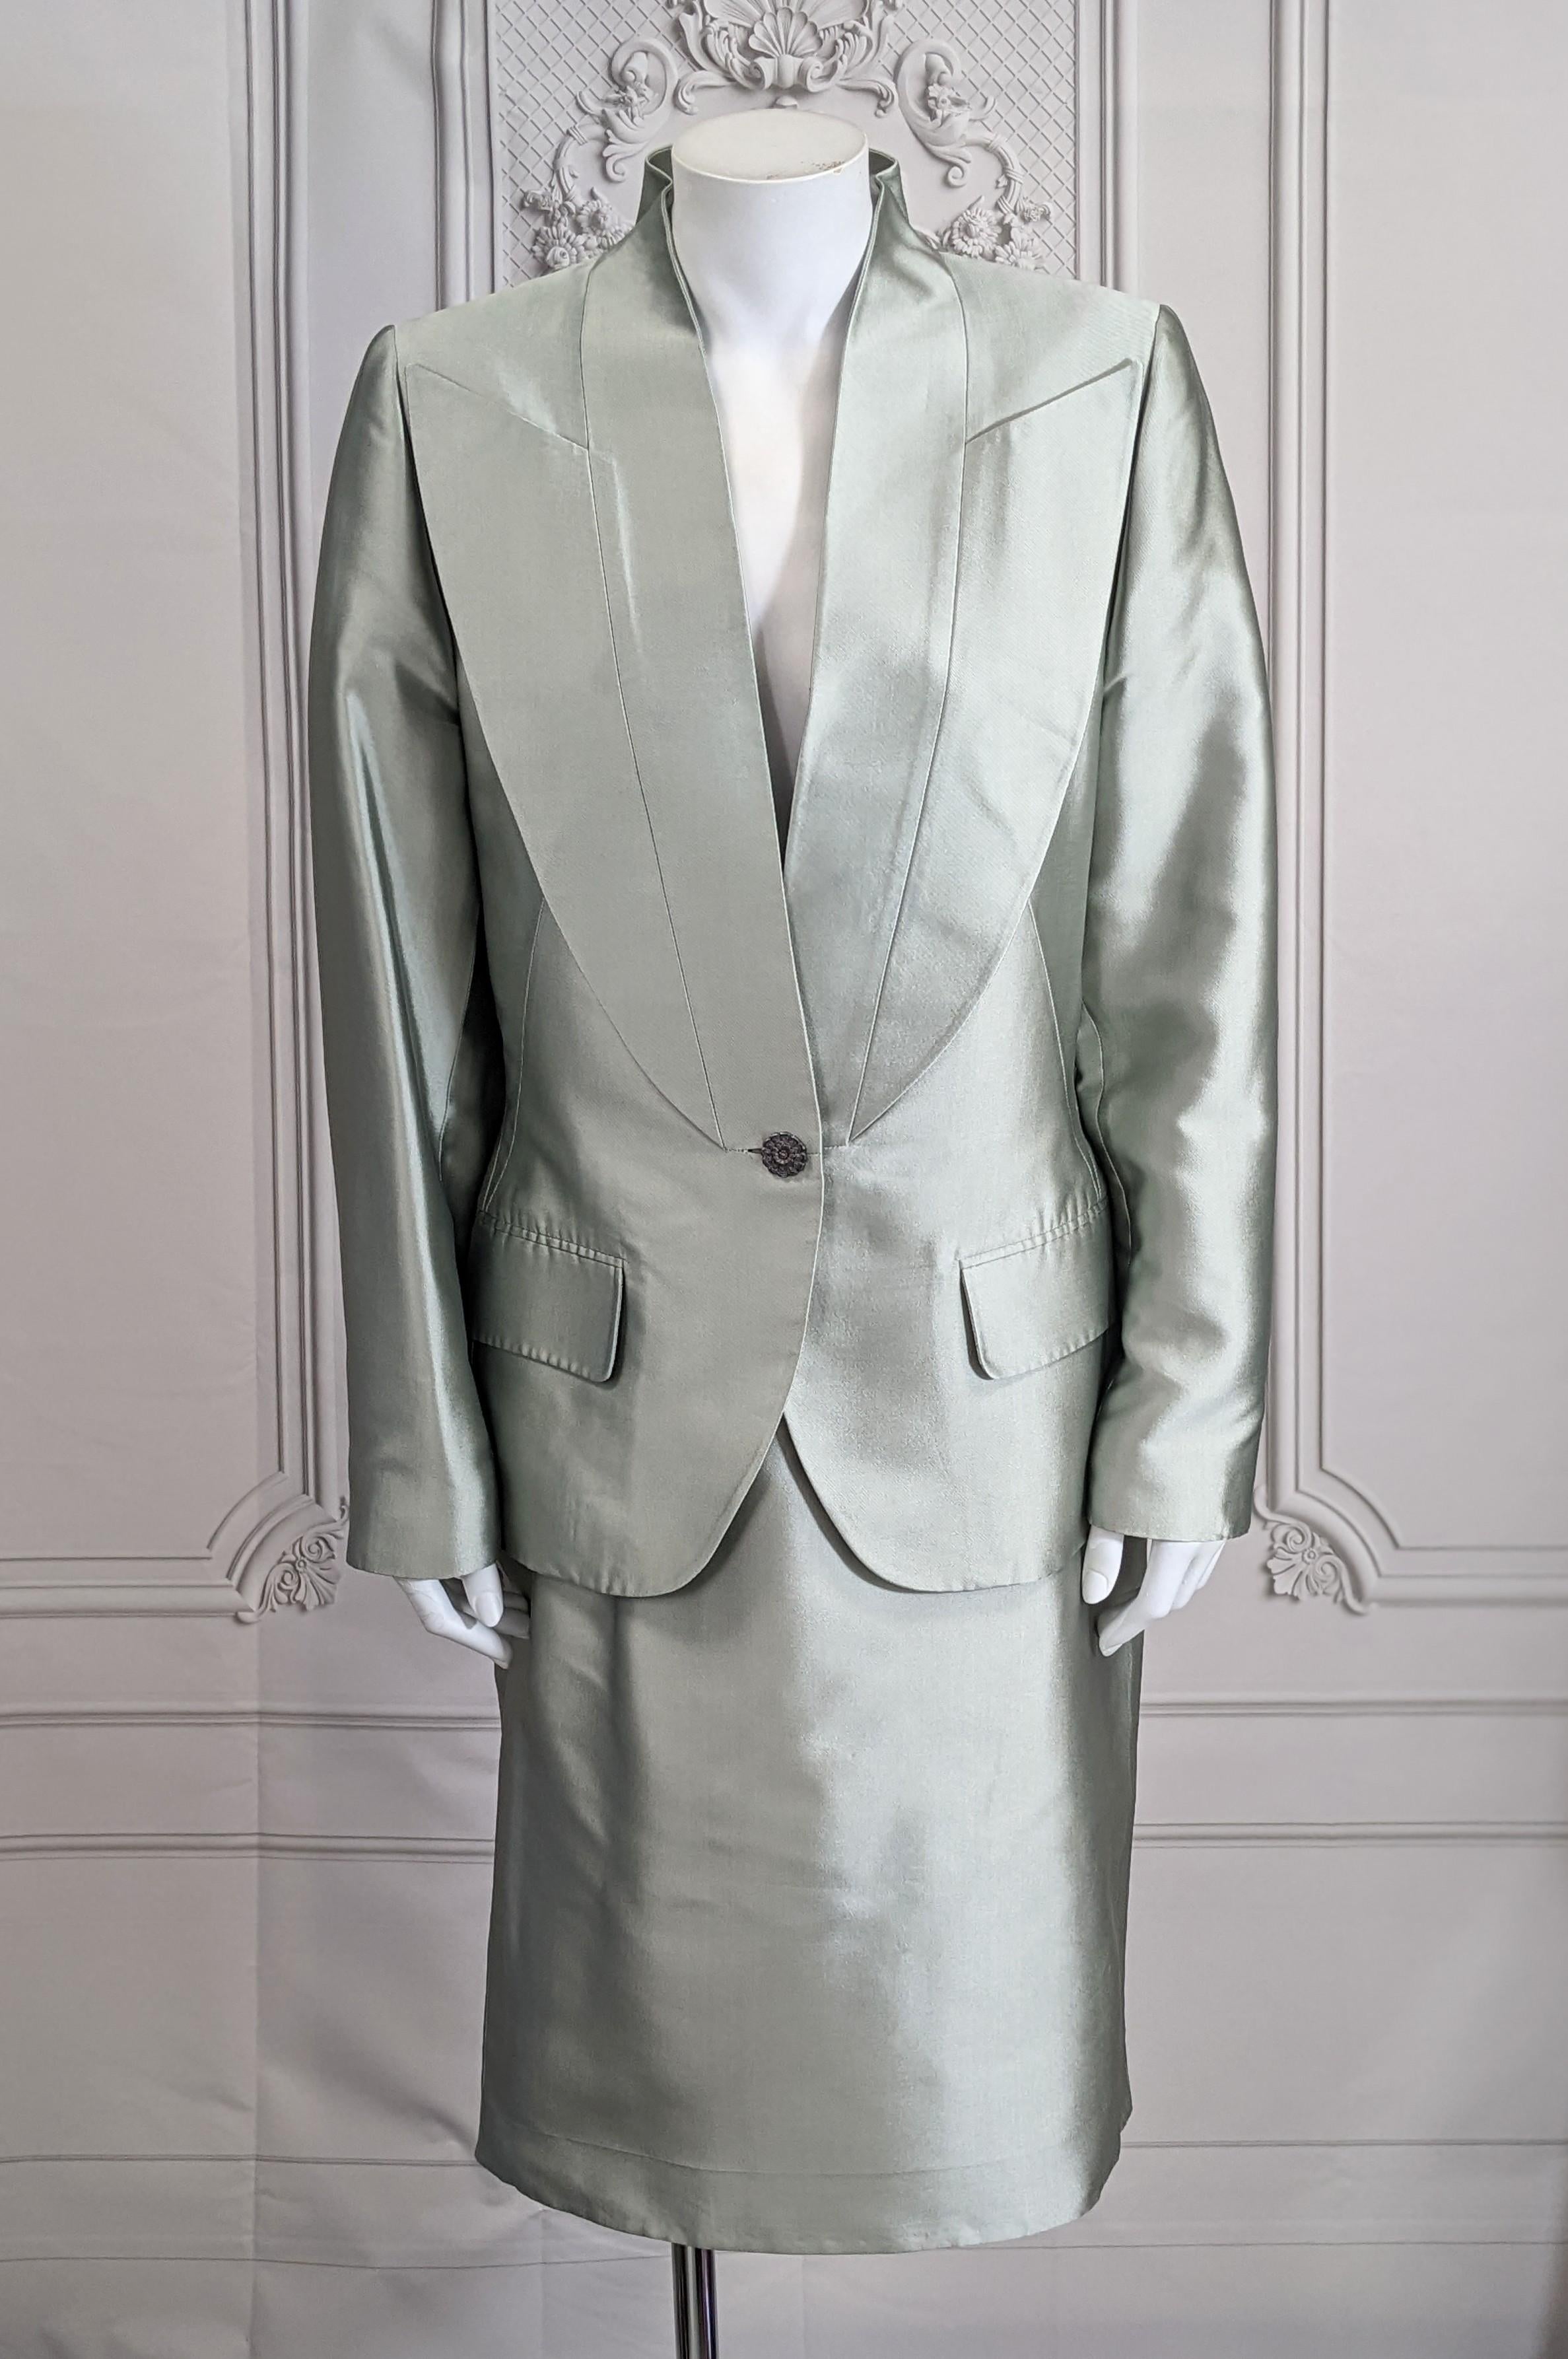 Givenchy Haute Couture Celadon Silk Twill Suit, Alexander McQueen. Razor sharp detailing with extreme pointy lapels inserted into front panels with a high stand away collar. Slim cut skirt. Silver plated faux cut steel Victorian buttons on front and